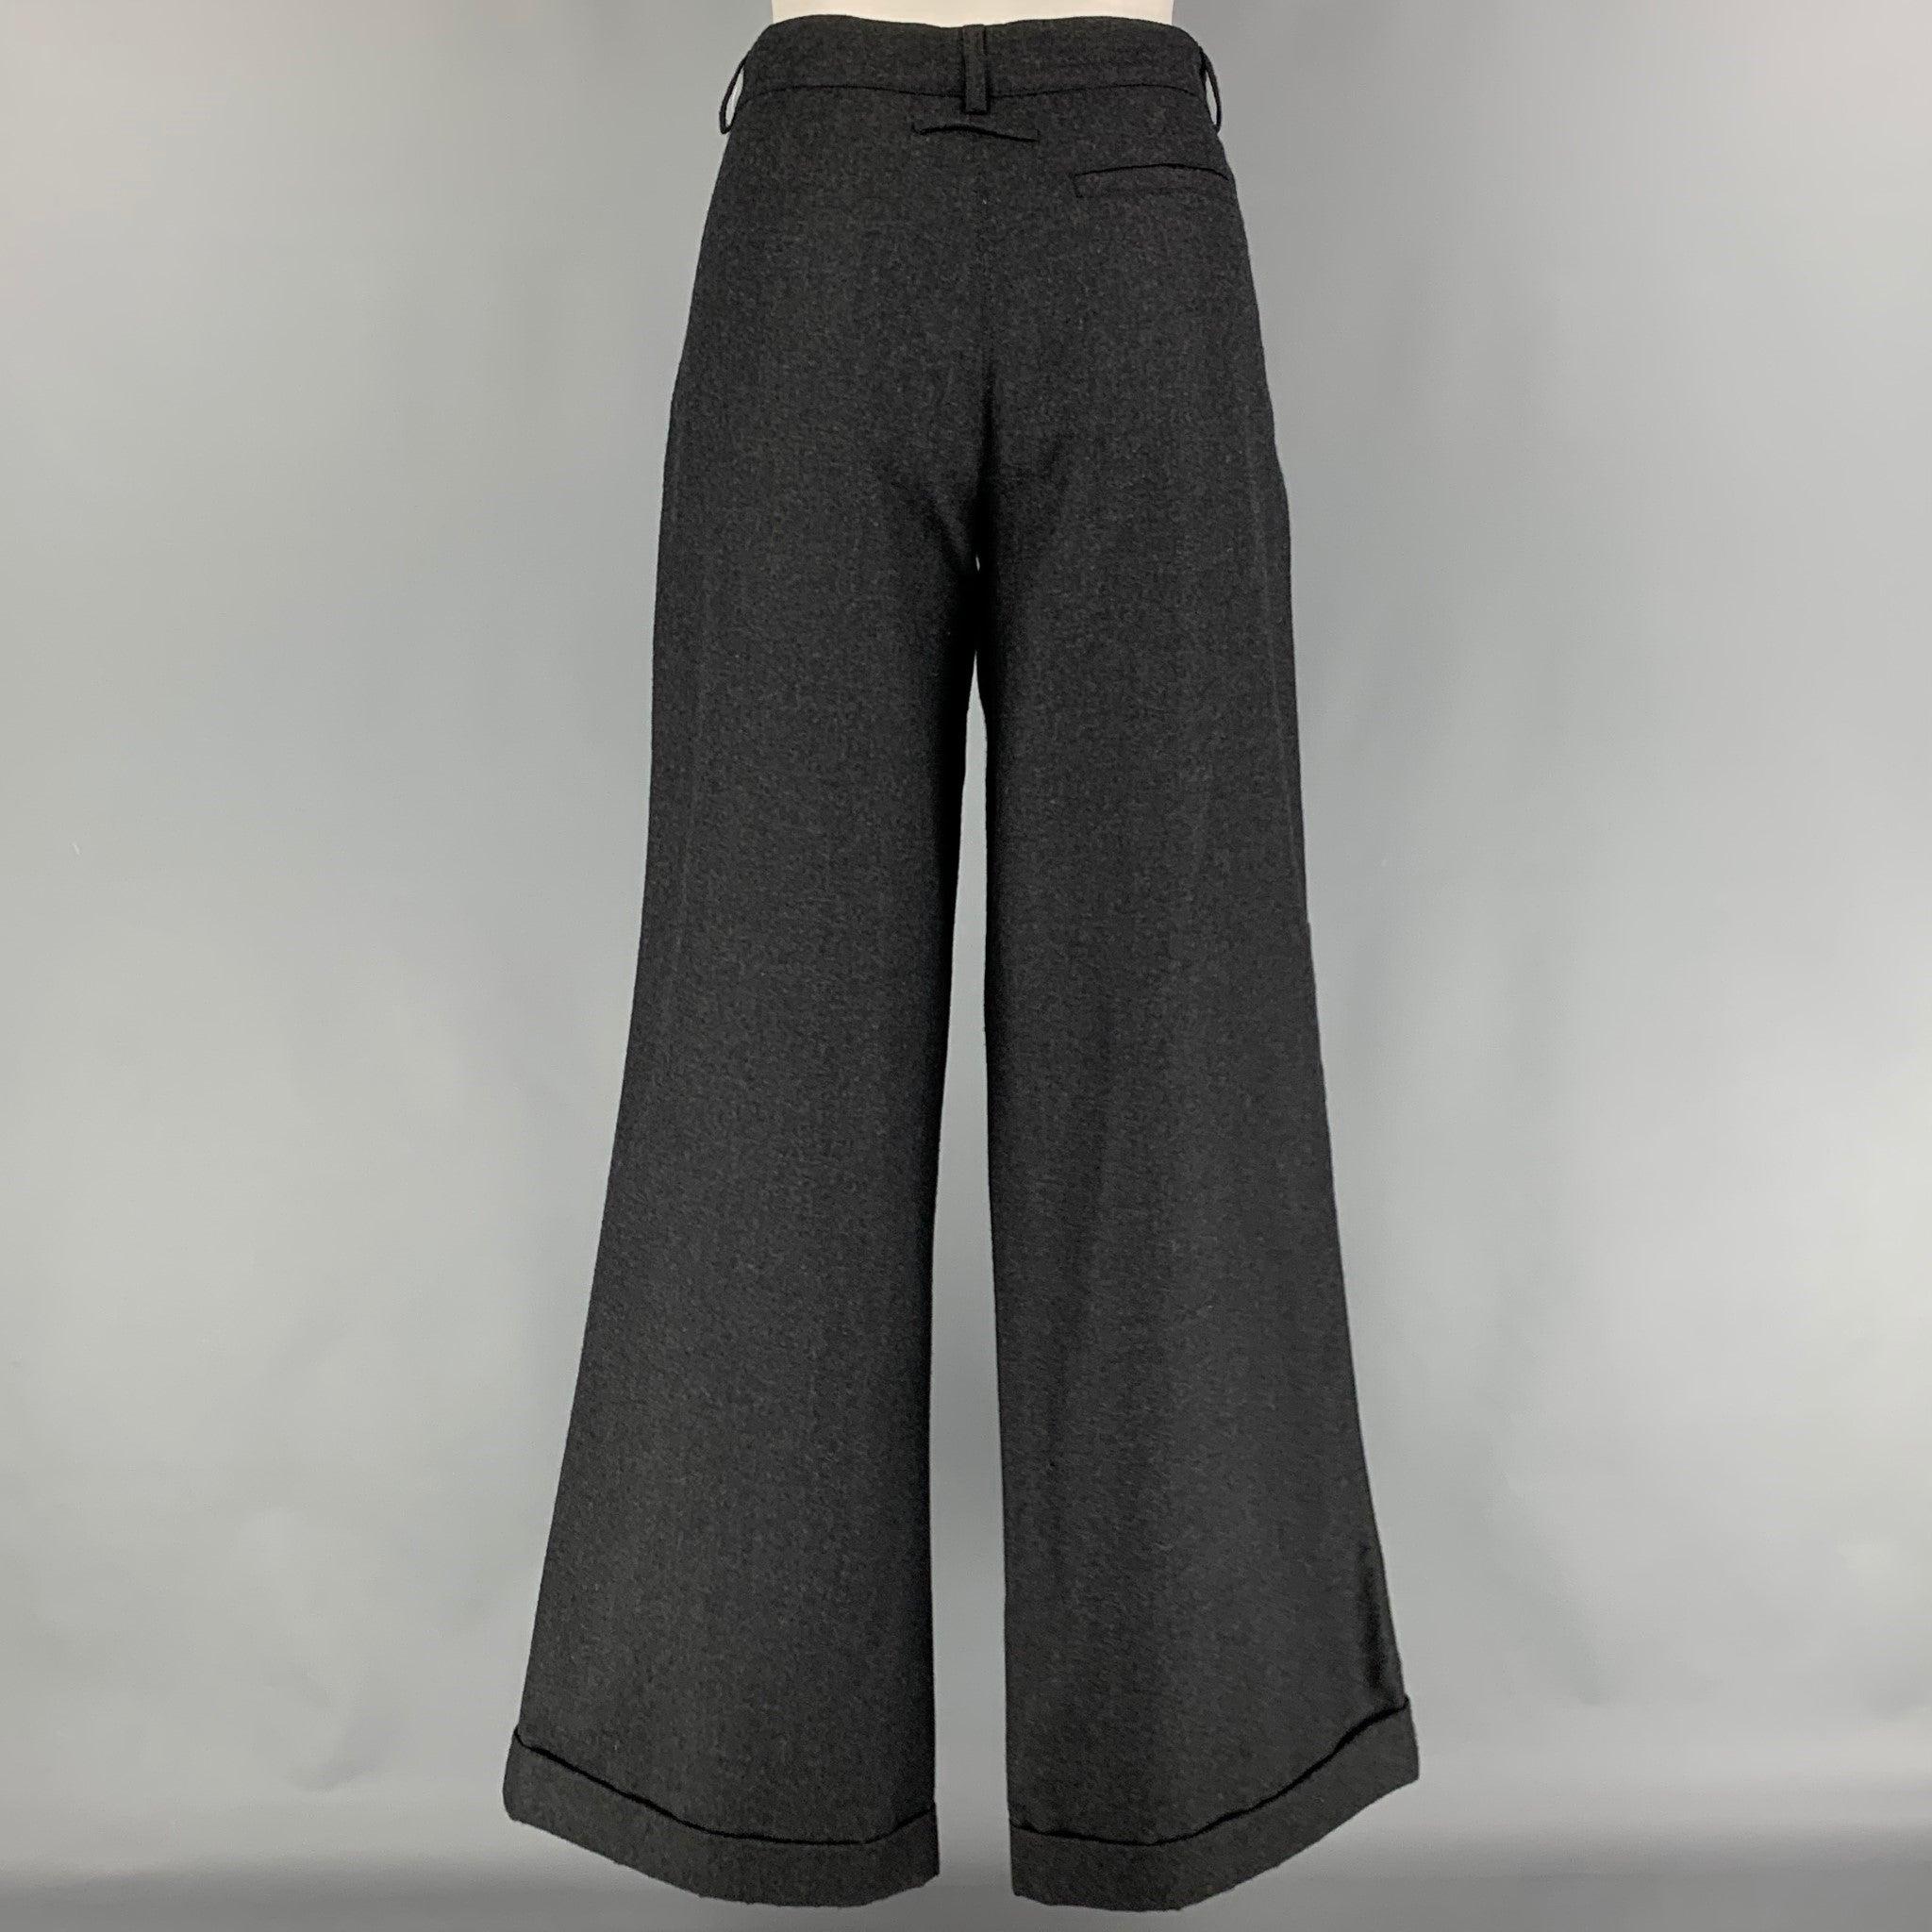 Vintage JEAN PAUL GAULTIER pants comes in a grey virgin wool featuring a wide leg, front patch pockets, front tab, and a zip fly closure.
Very Good
Pre-Owned Condition. 

Marked:   8 

Measurements: 
  Waist: 32 inches  Rise:
10 inches  Inseam: 33.5